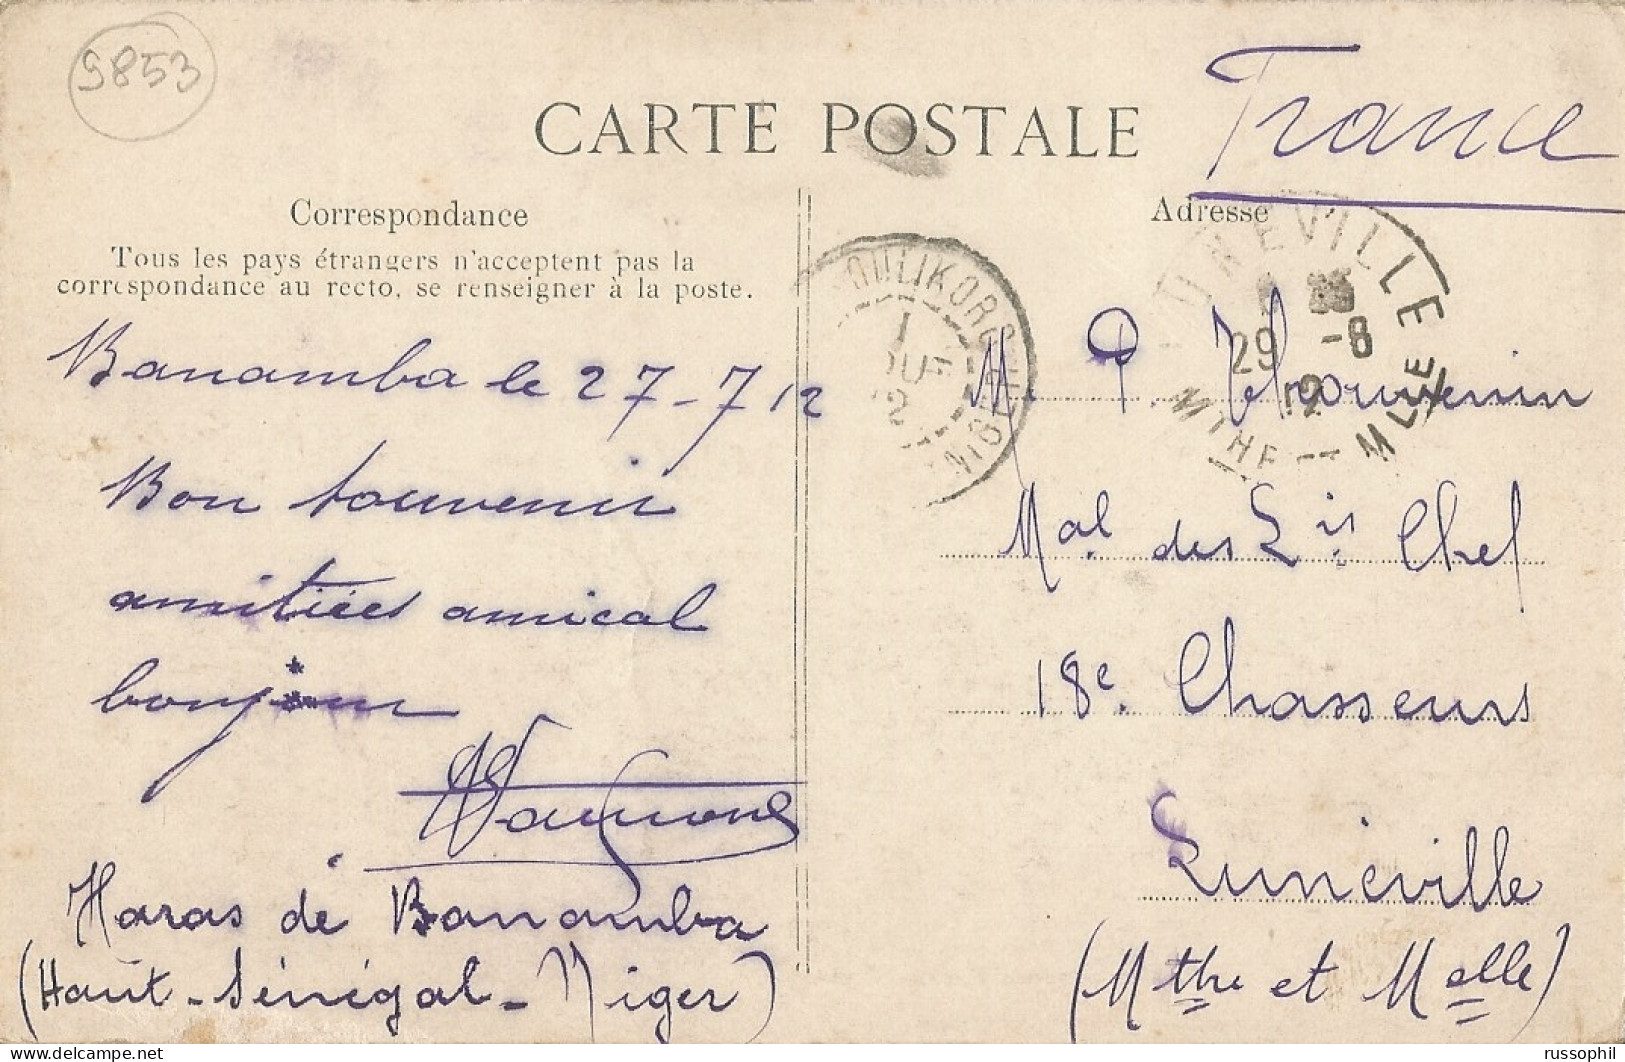 HAUT SENEGAL NIGER - 5 CENT. FAIDHERBE FRANKING PC FROM KOULIKORO TO FRANCE - 1912 - Covers & Documents